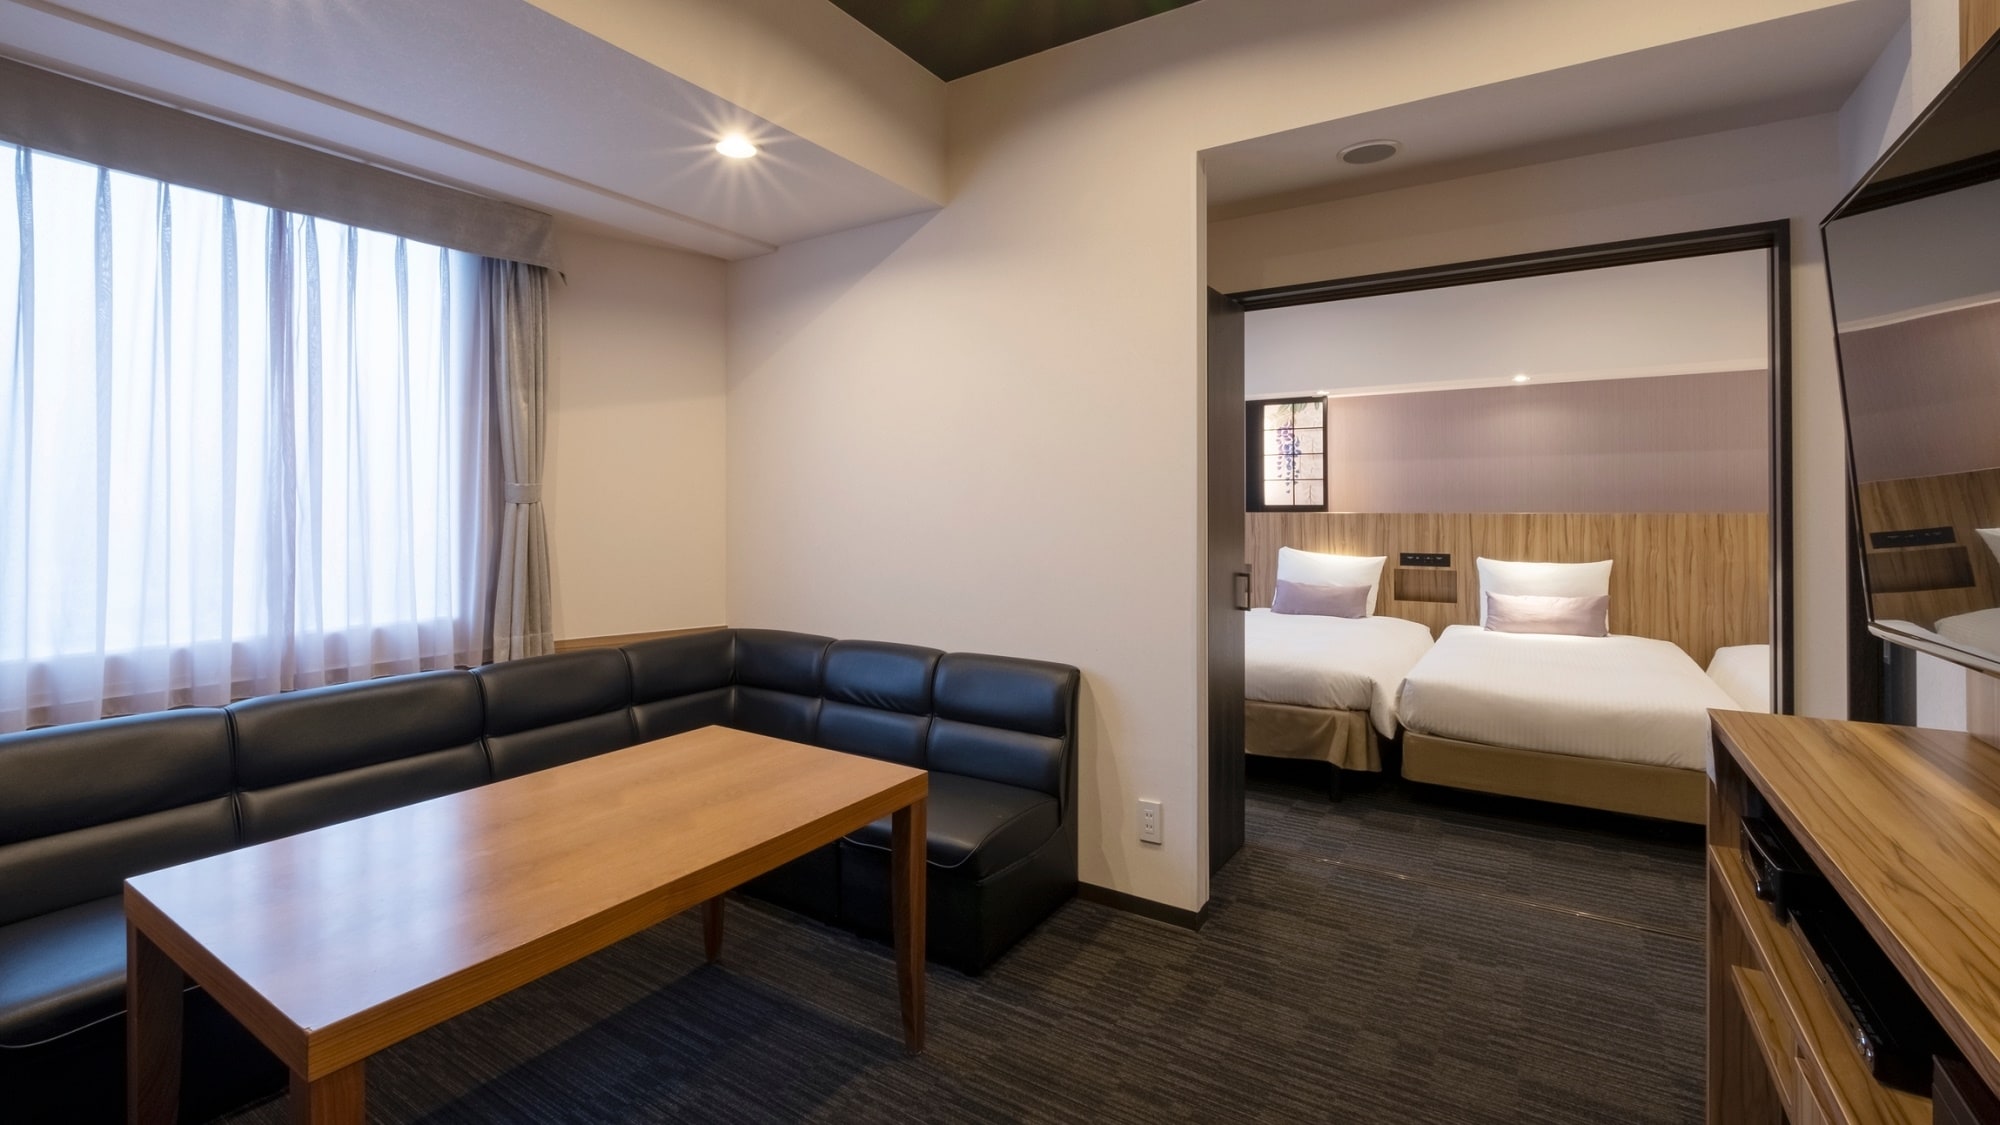 ◆Family Suite｜A large number of people can stay comfortably in this spacious room.